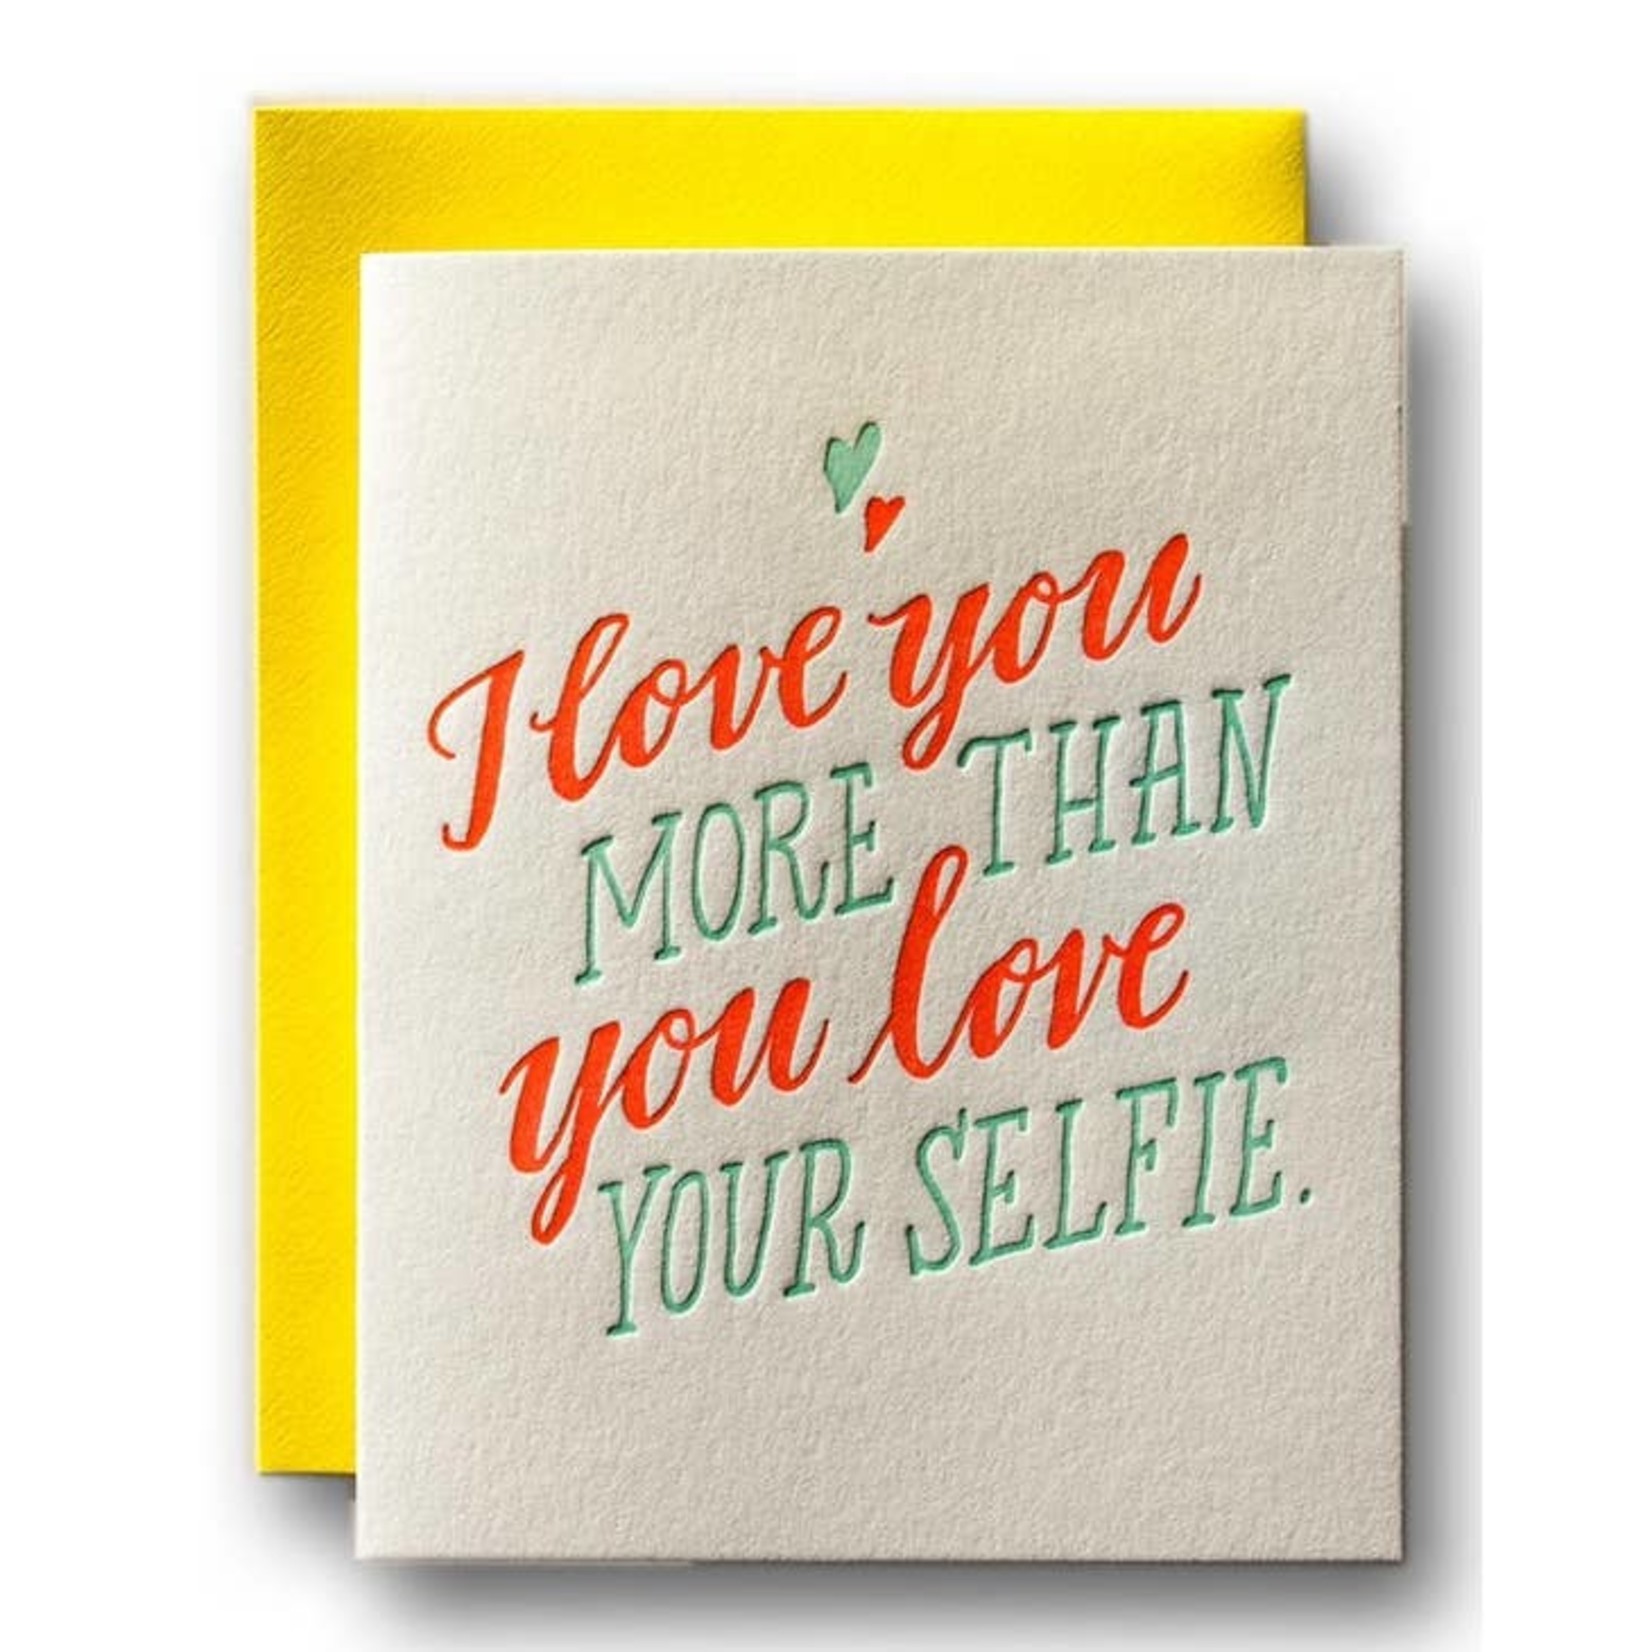 Greeting Cards - Love Love Your Selfie